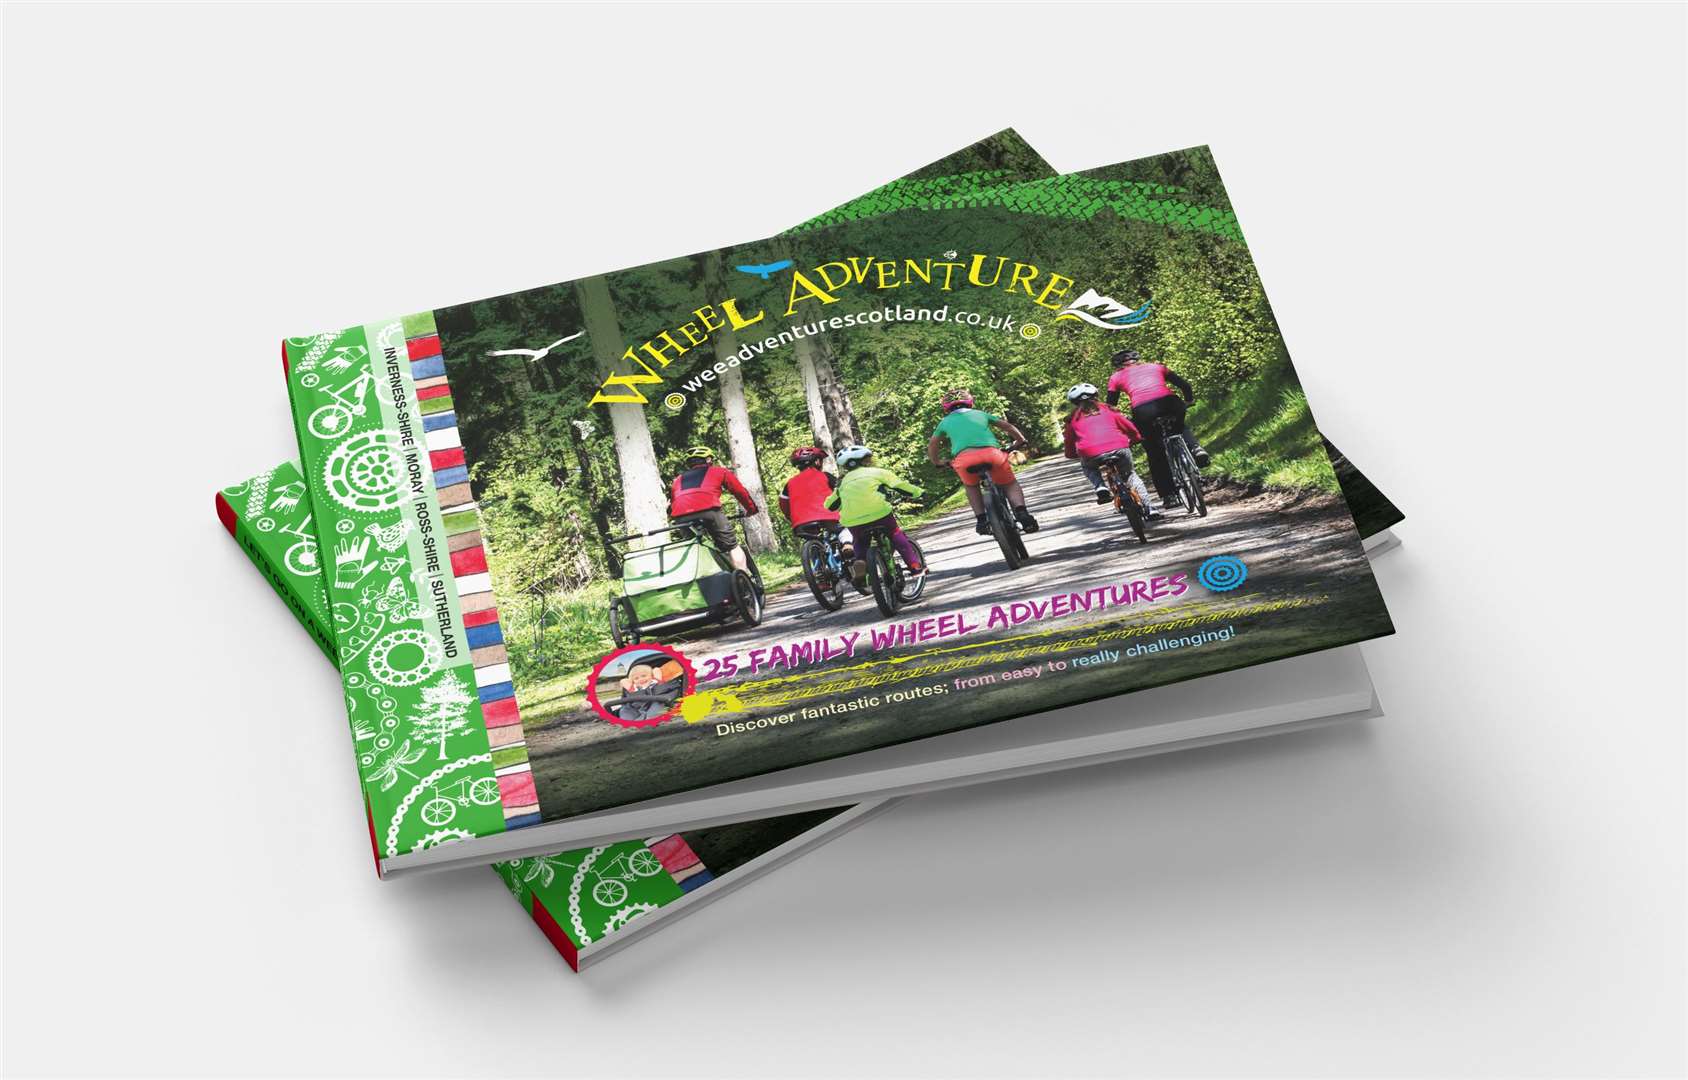 The Wheel Adventure book is one of two inspiring activity titles from the Wee Adventure charity.